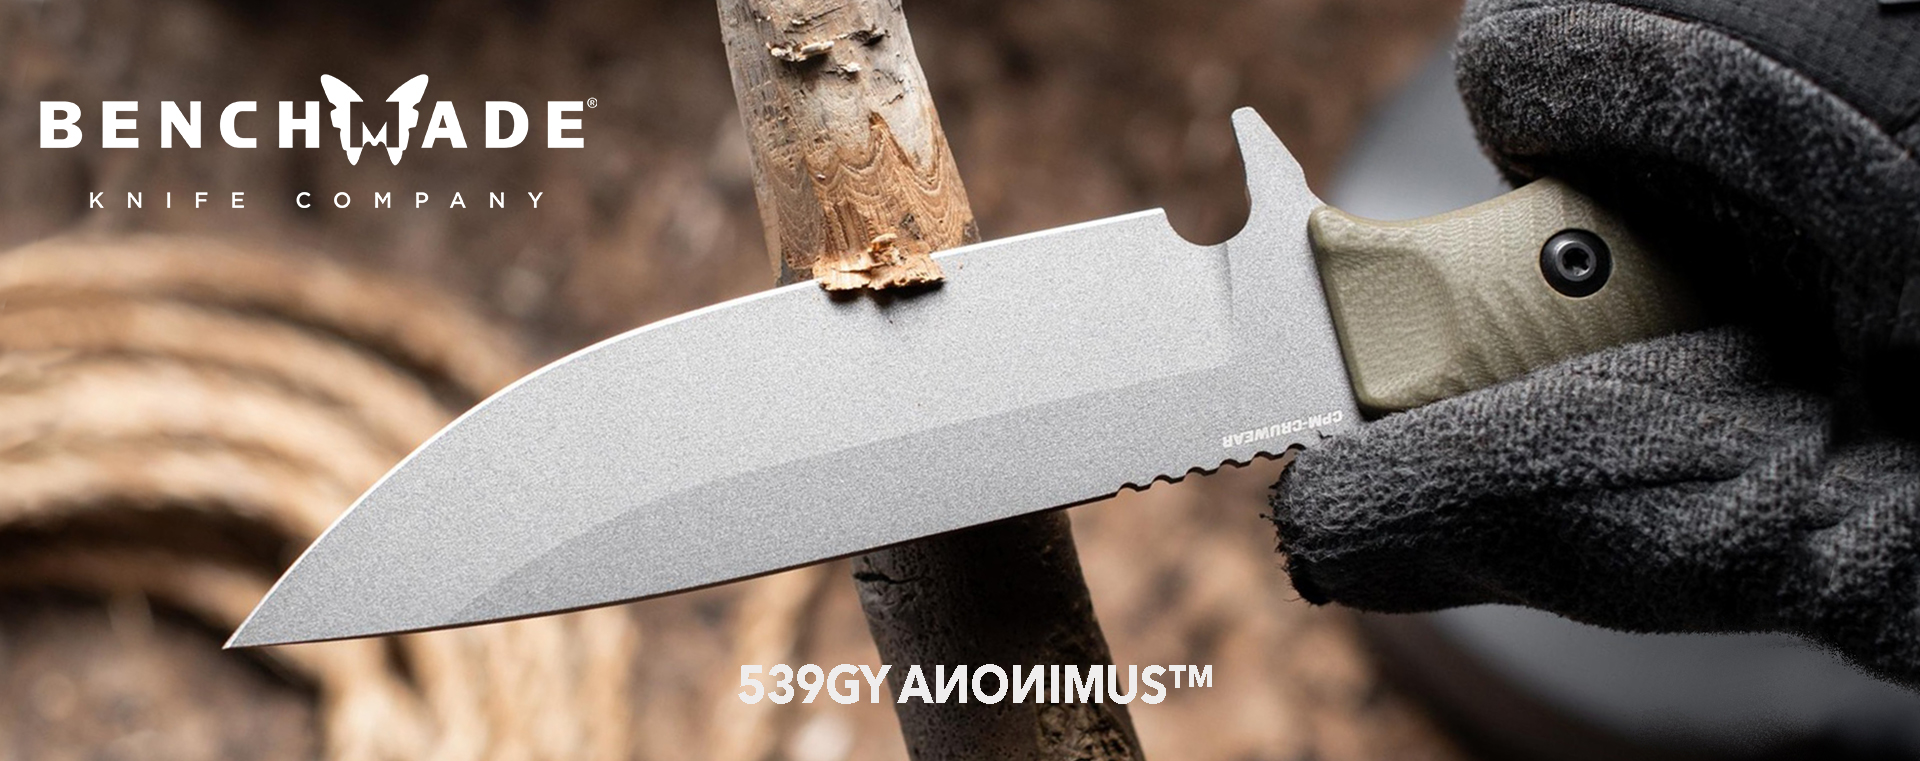 Outdoor Essential. Benchmade's New ANONIMUS